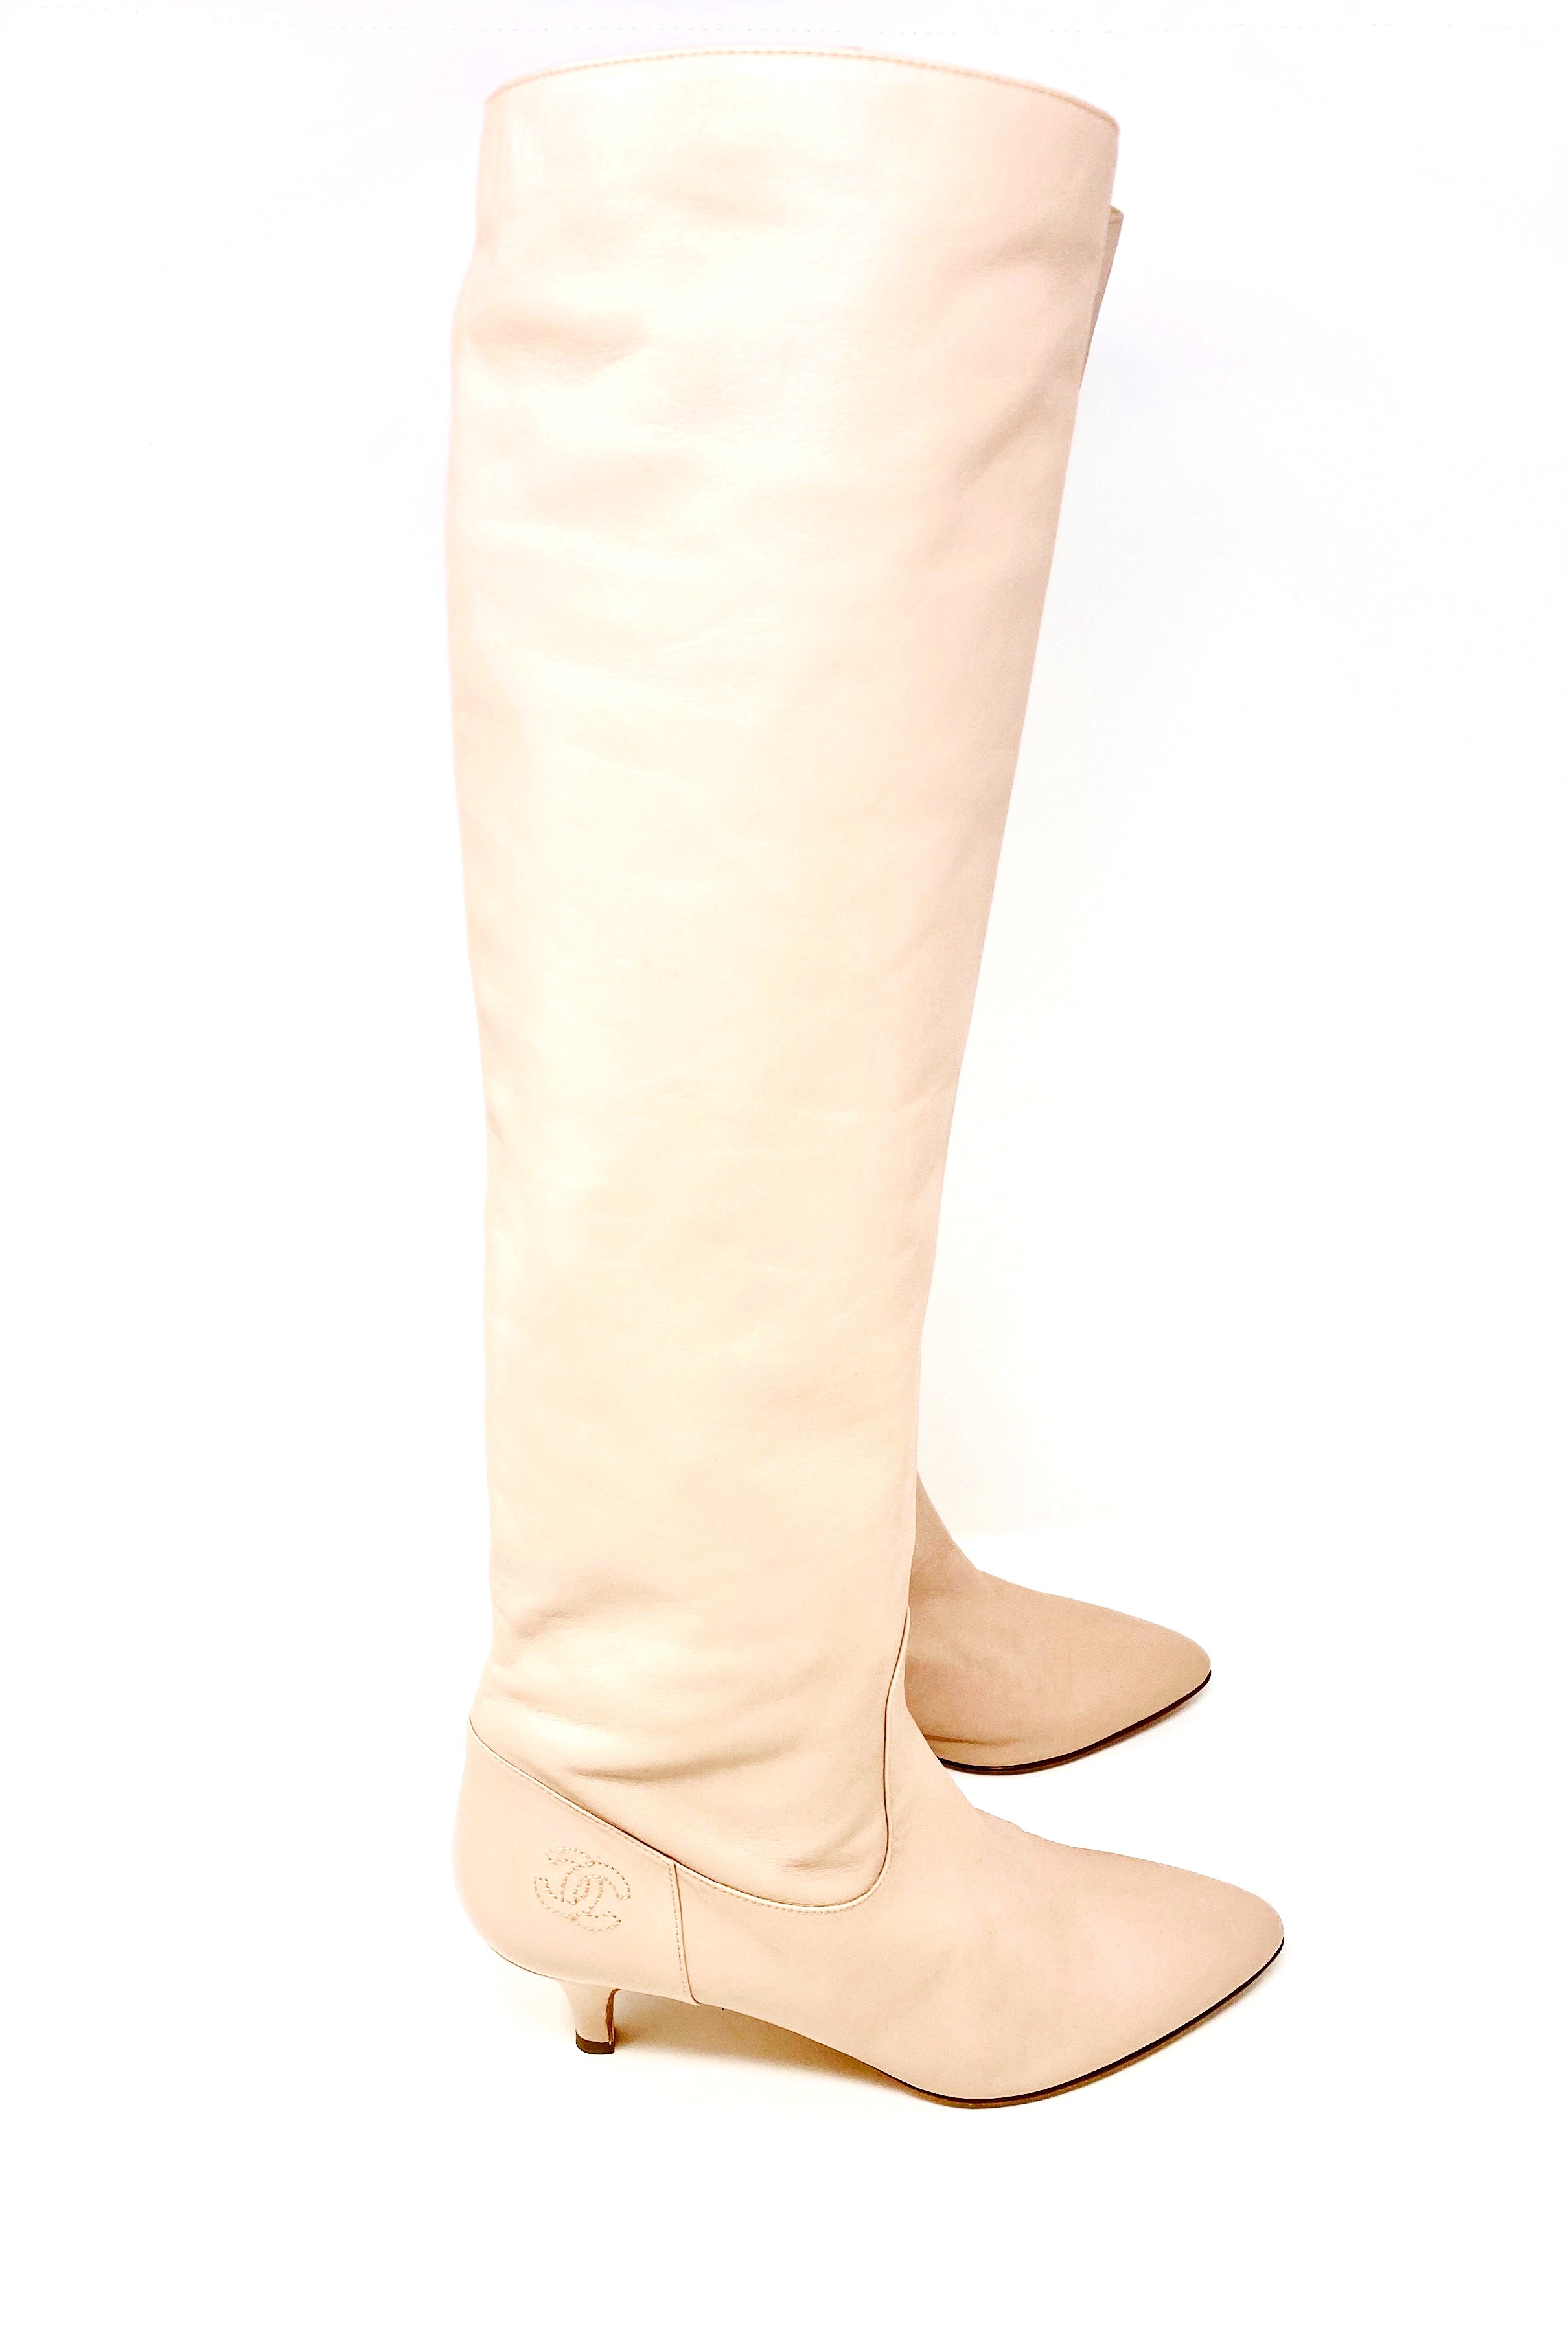 chanel high boots, beige leather, CC logo, knee-high.